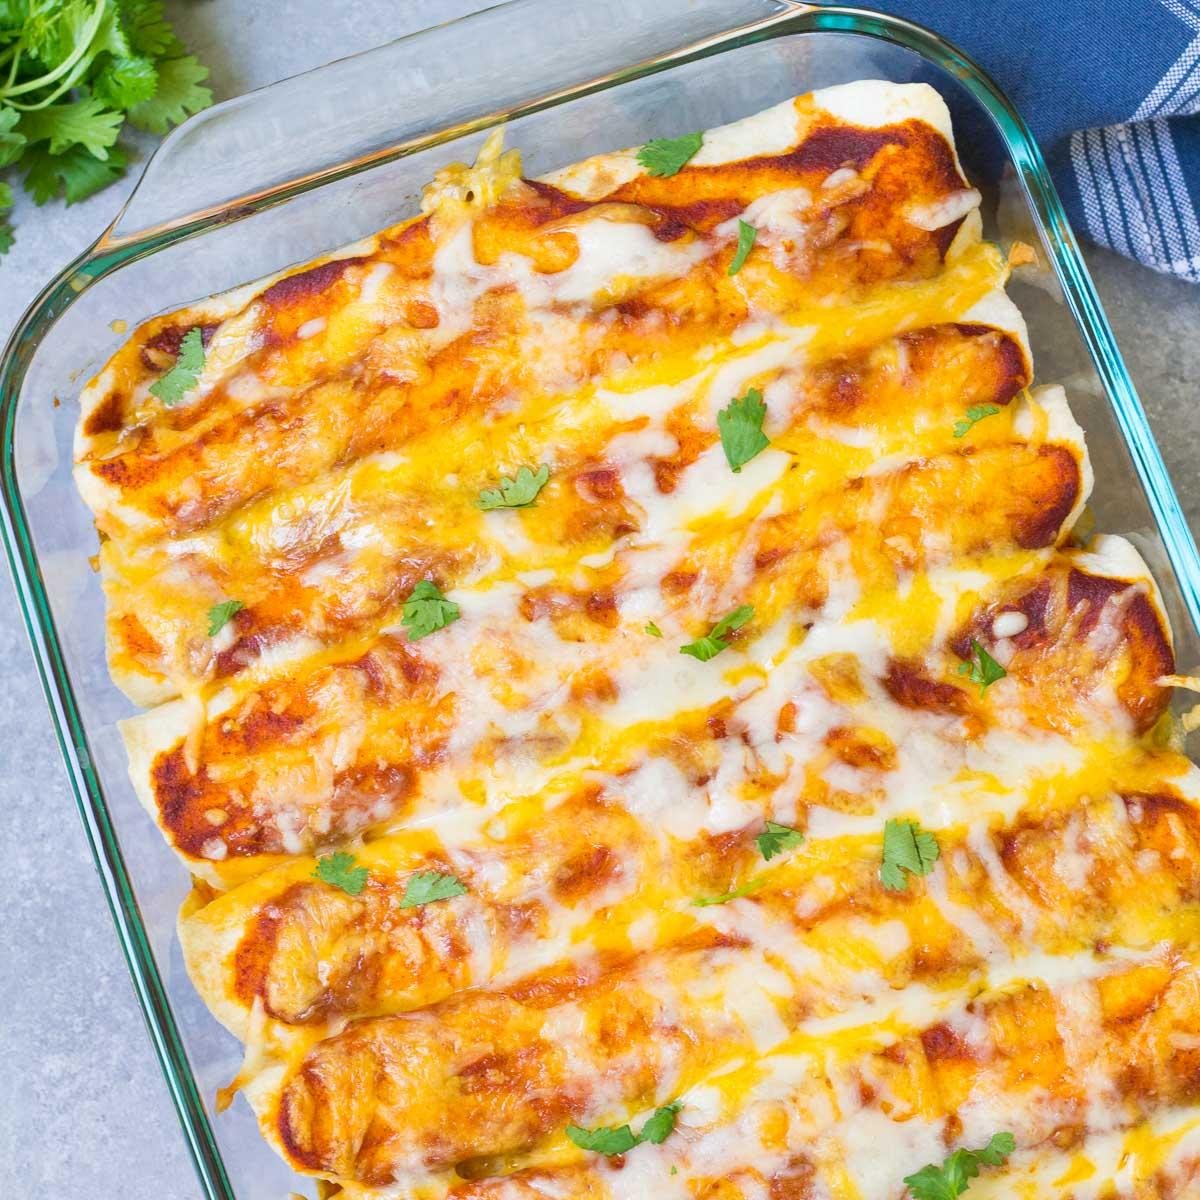 Spice Up Your Dinner Routine with our Mouthwatering Homemade Chicken Enchiladas Recipe